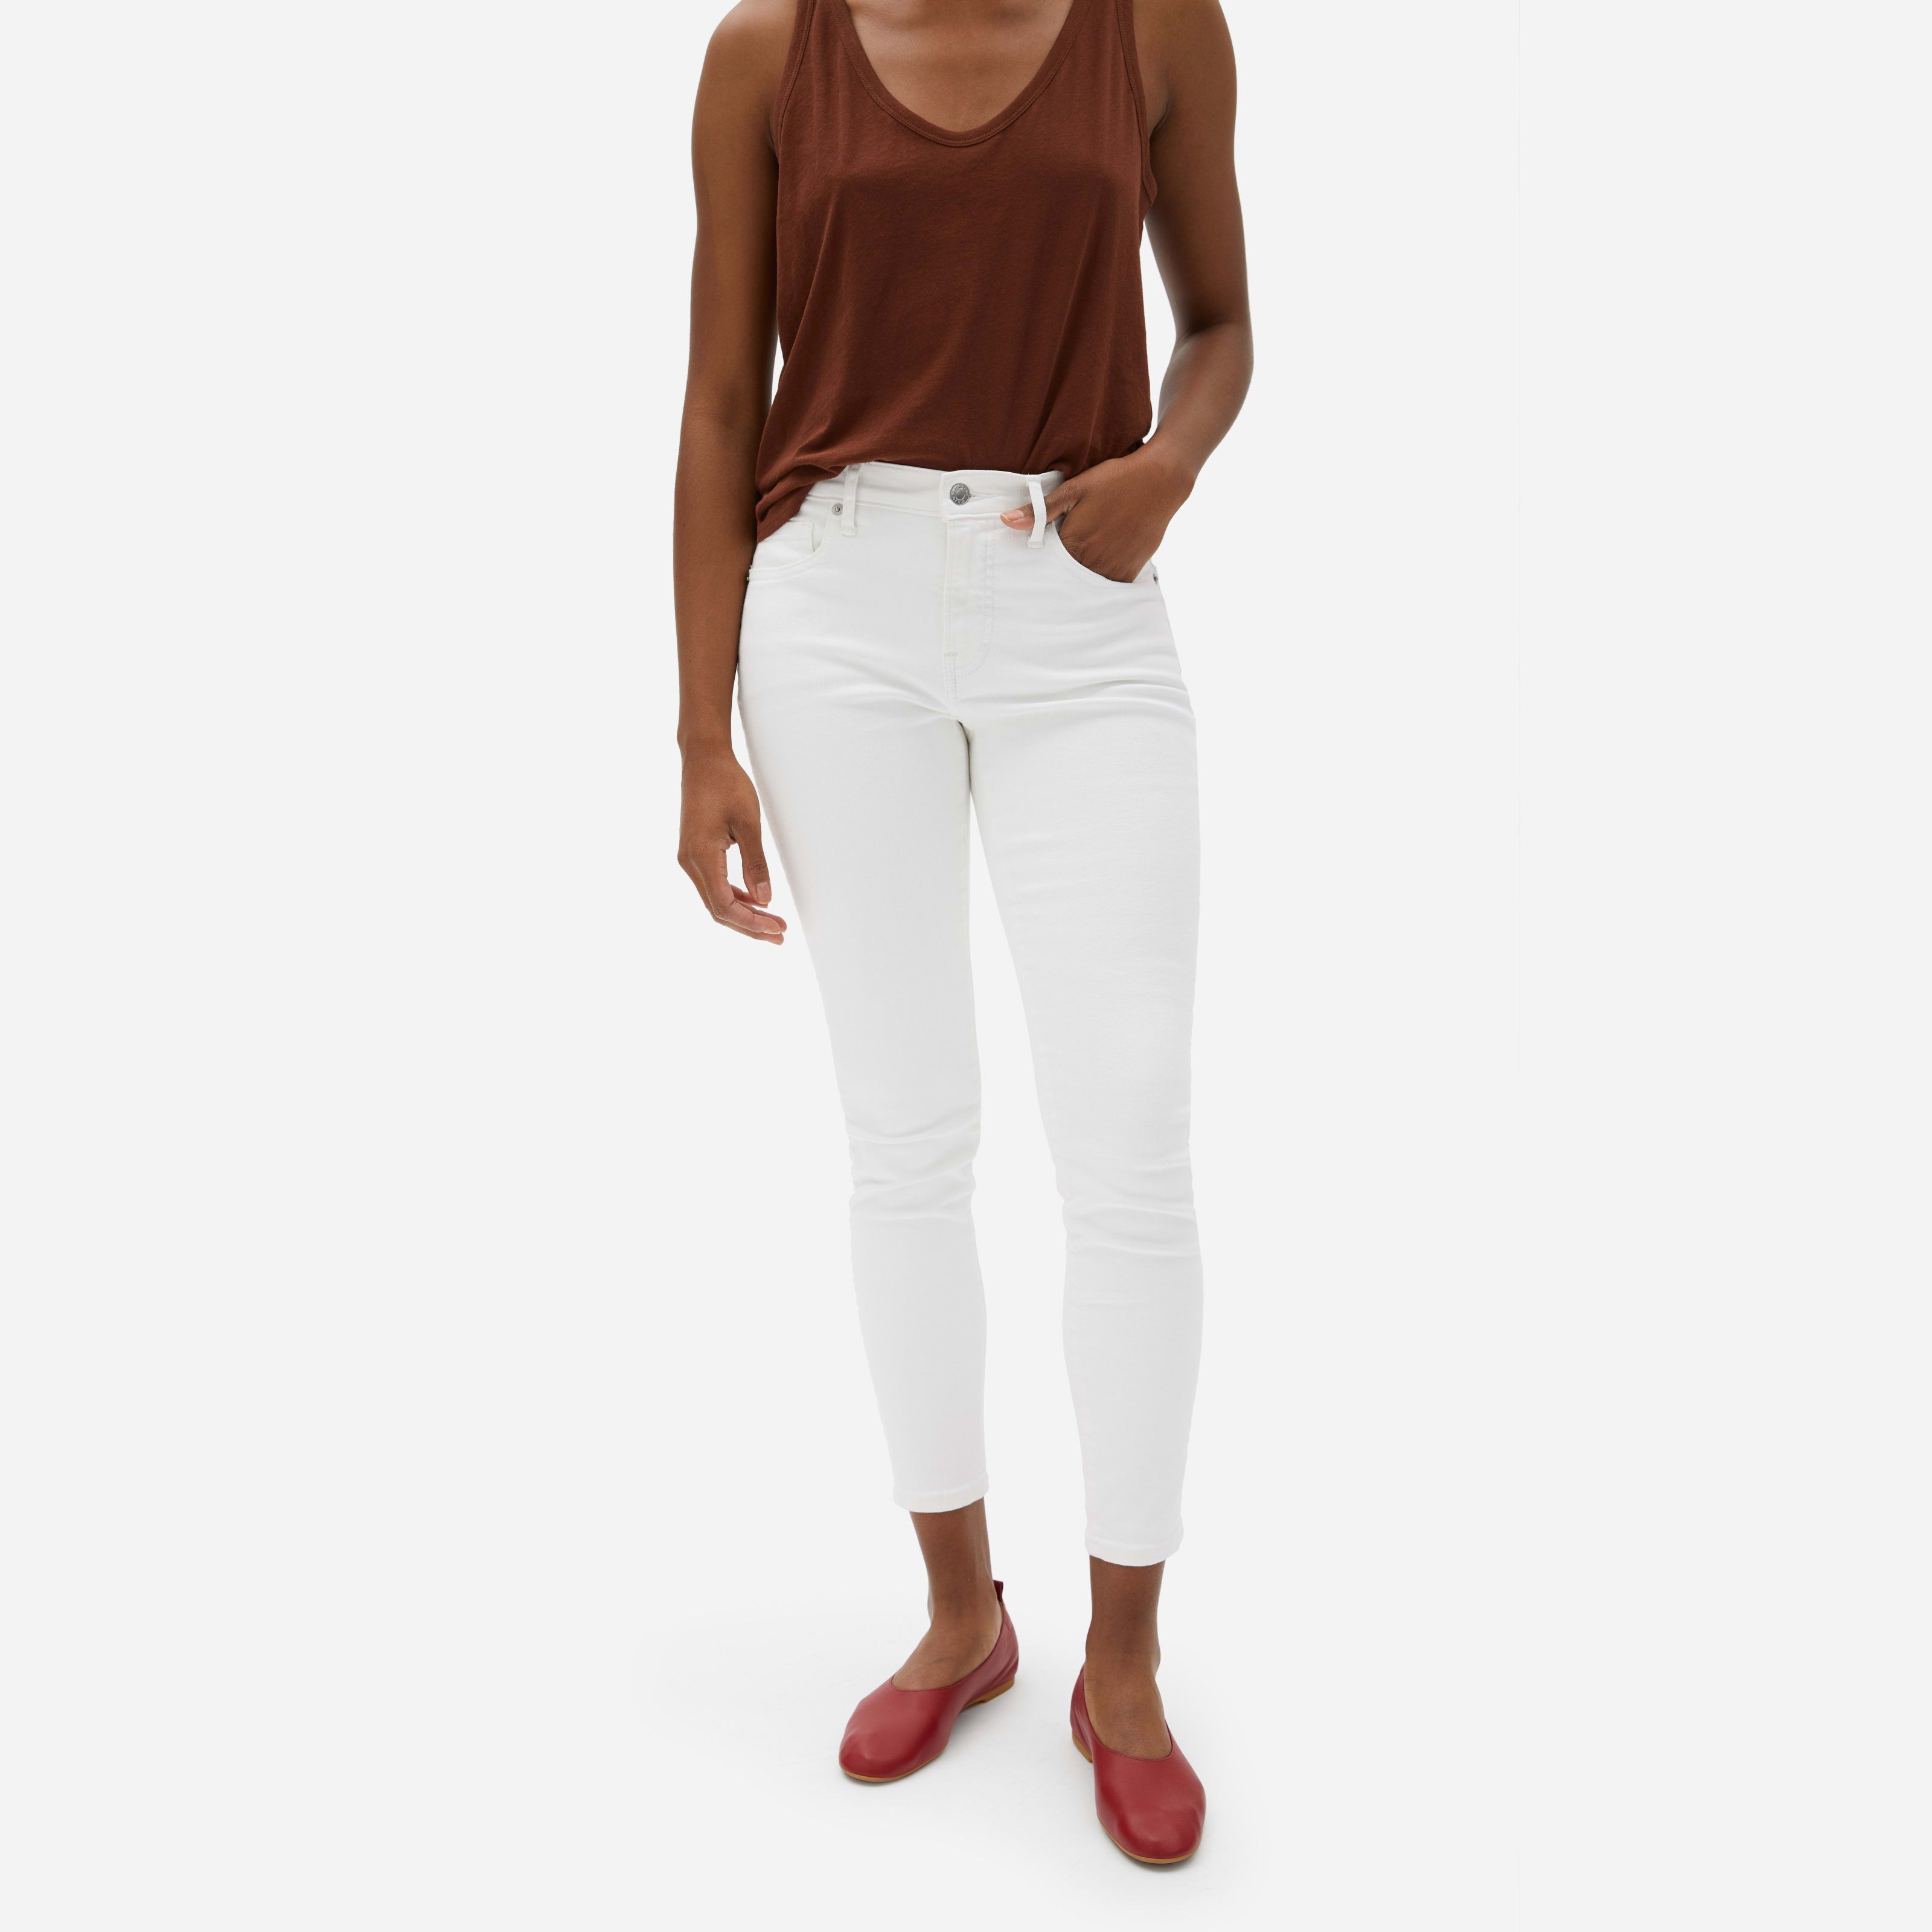 Women's Authentic Stretch Mid-Rise Skinny by Everlane in White, Size 35 | Everlane